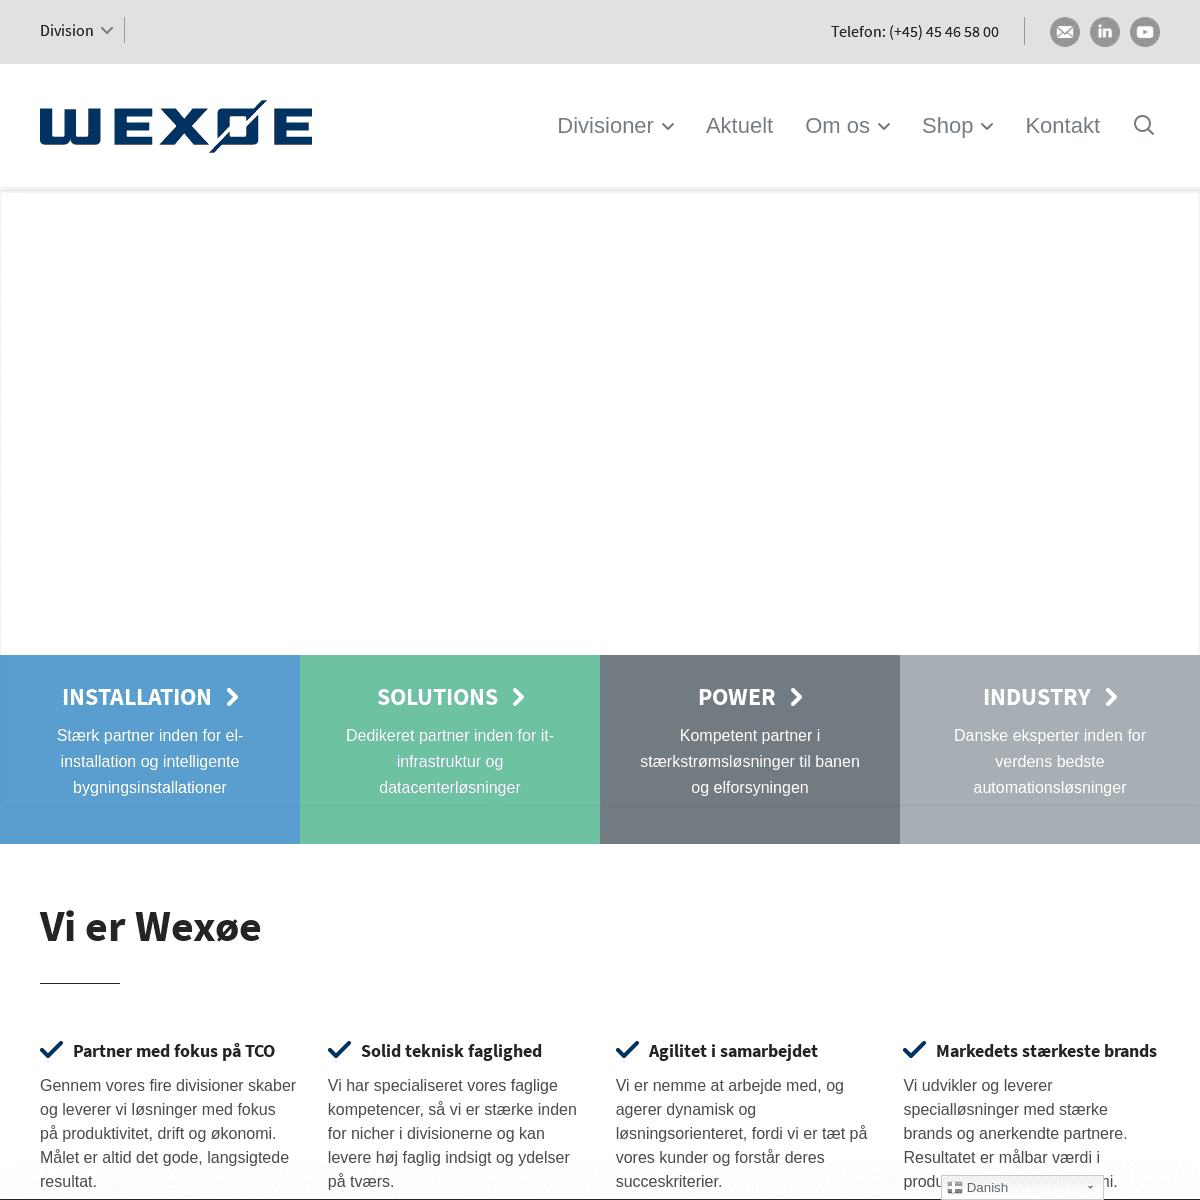 A complete backup of wexoe.dk